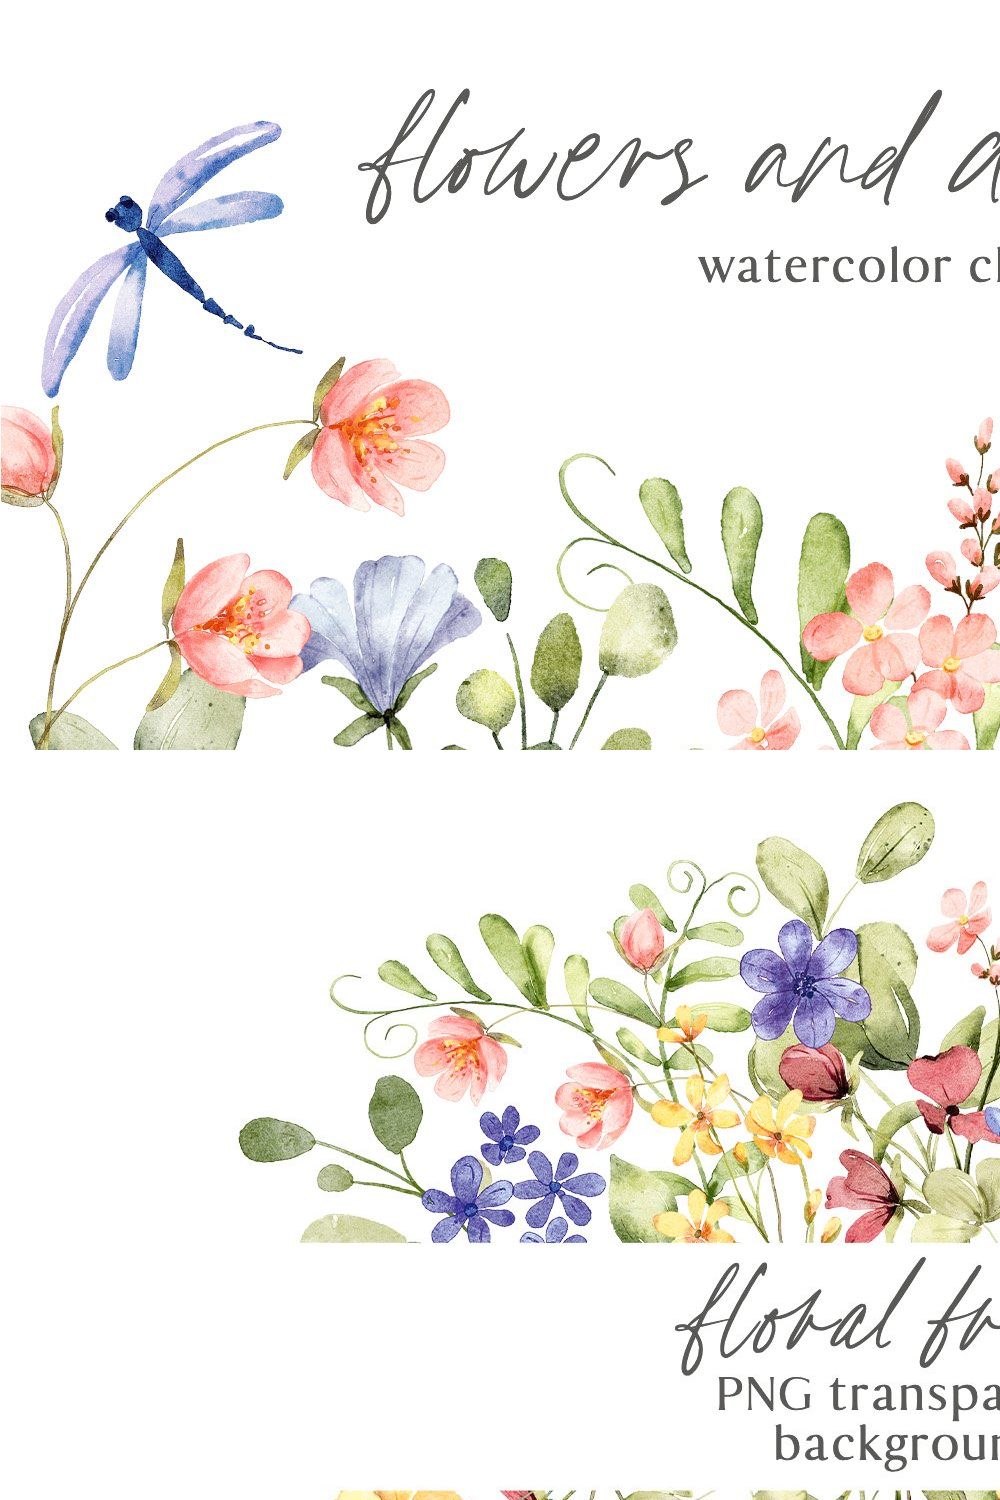 Flowers and dragonflies. pinterest preview image.